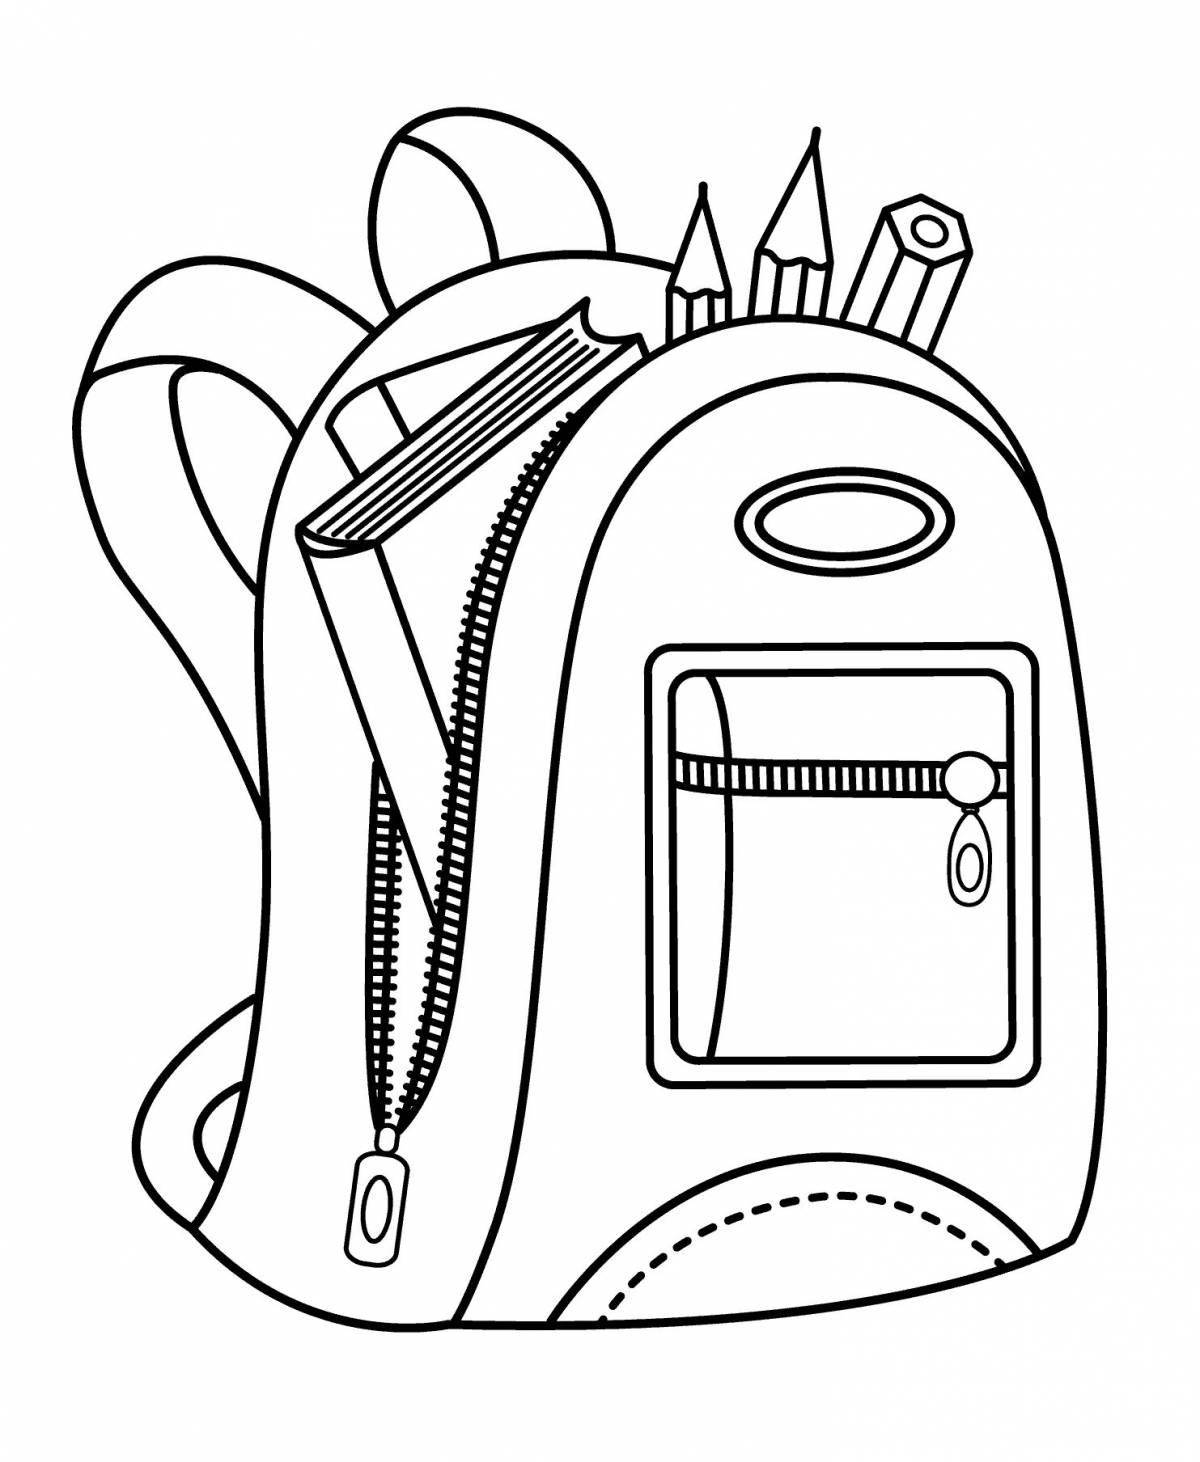 Fun coloring of a briefcase for children